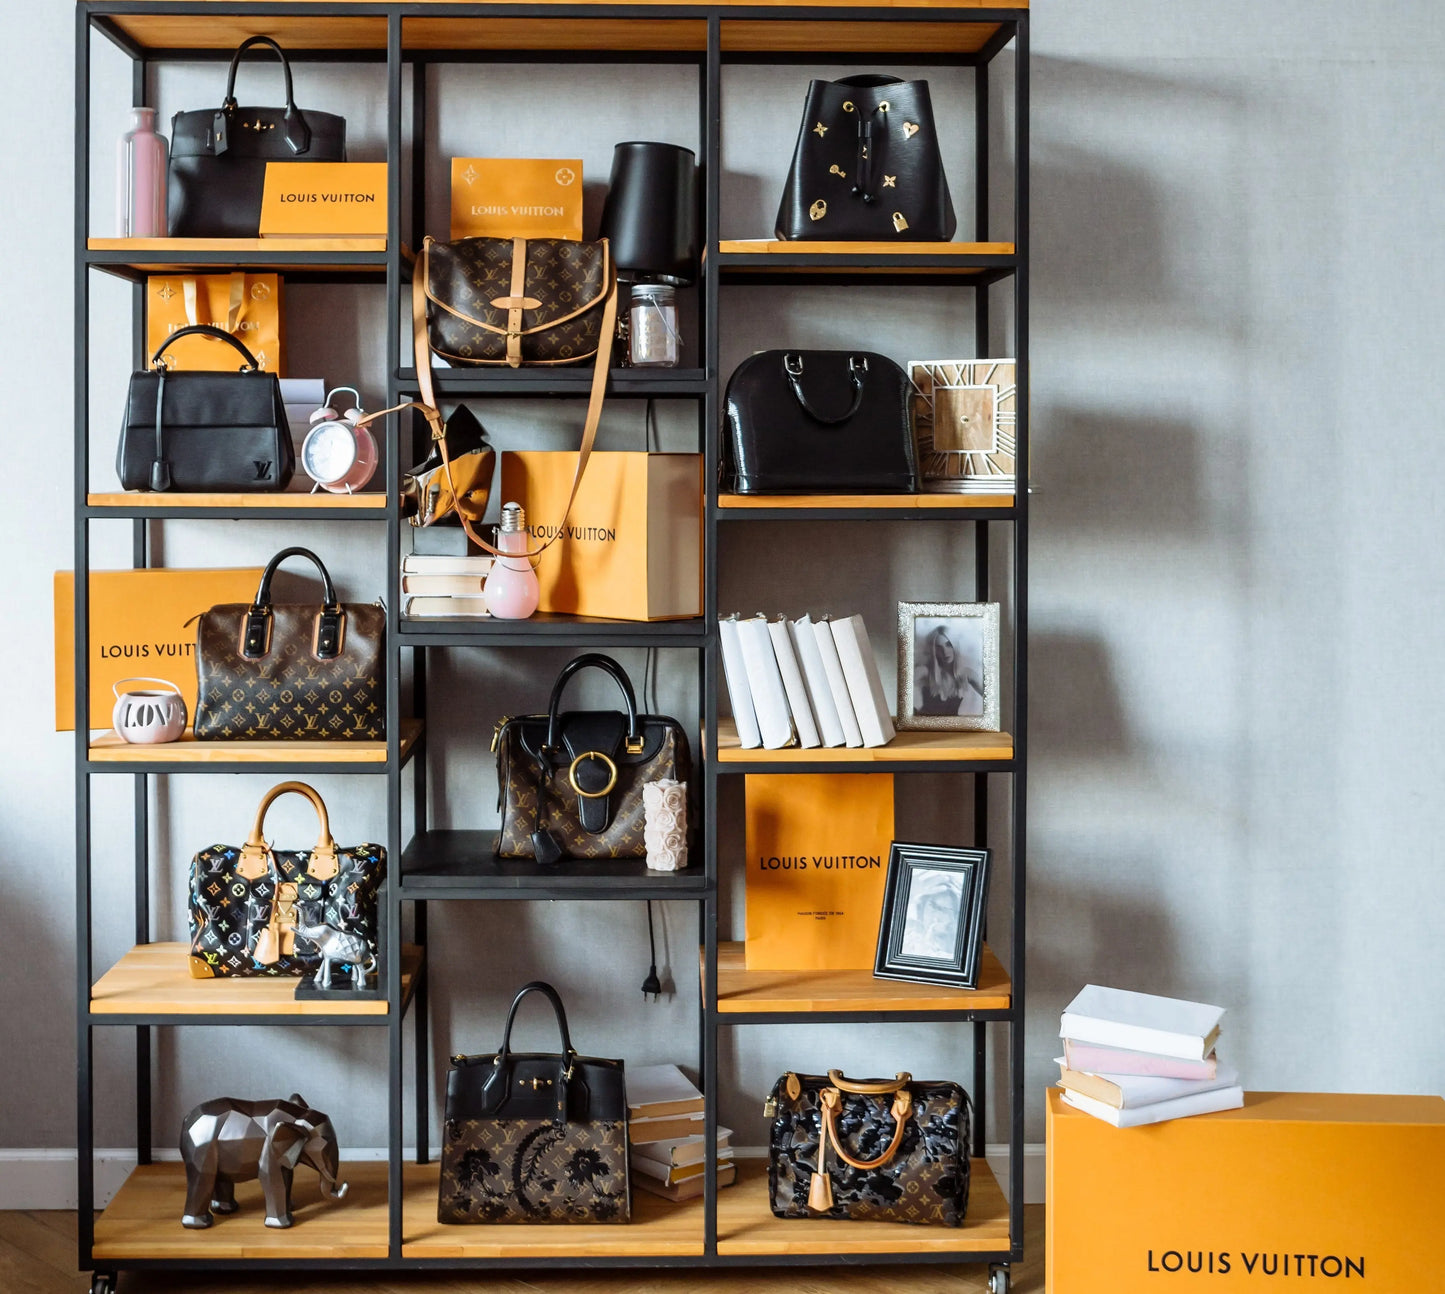 How to Store Your Designer Bags?